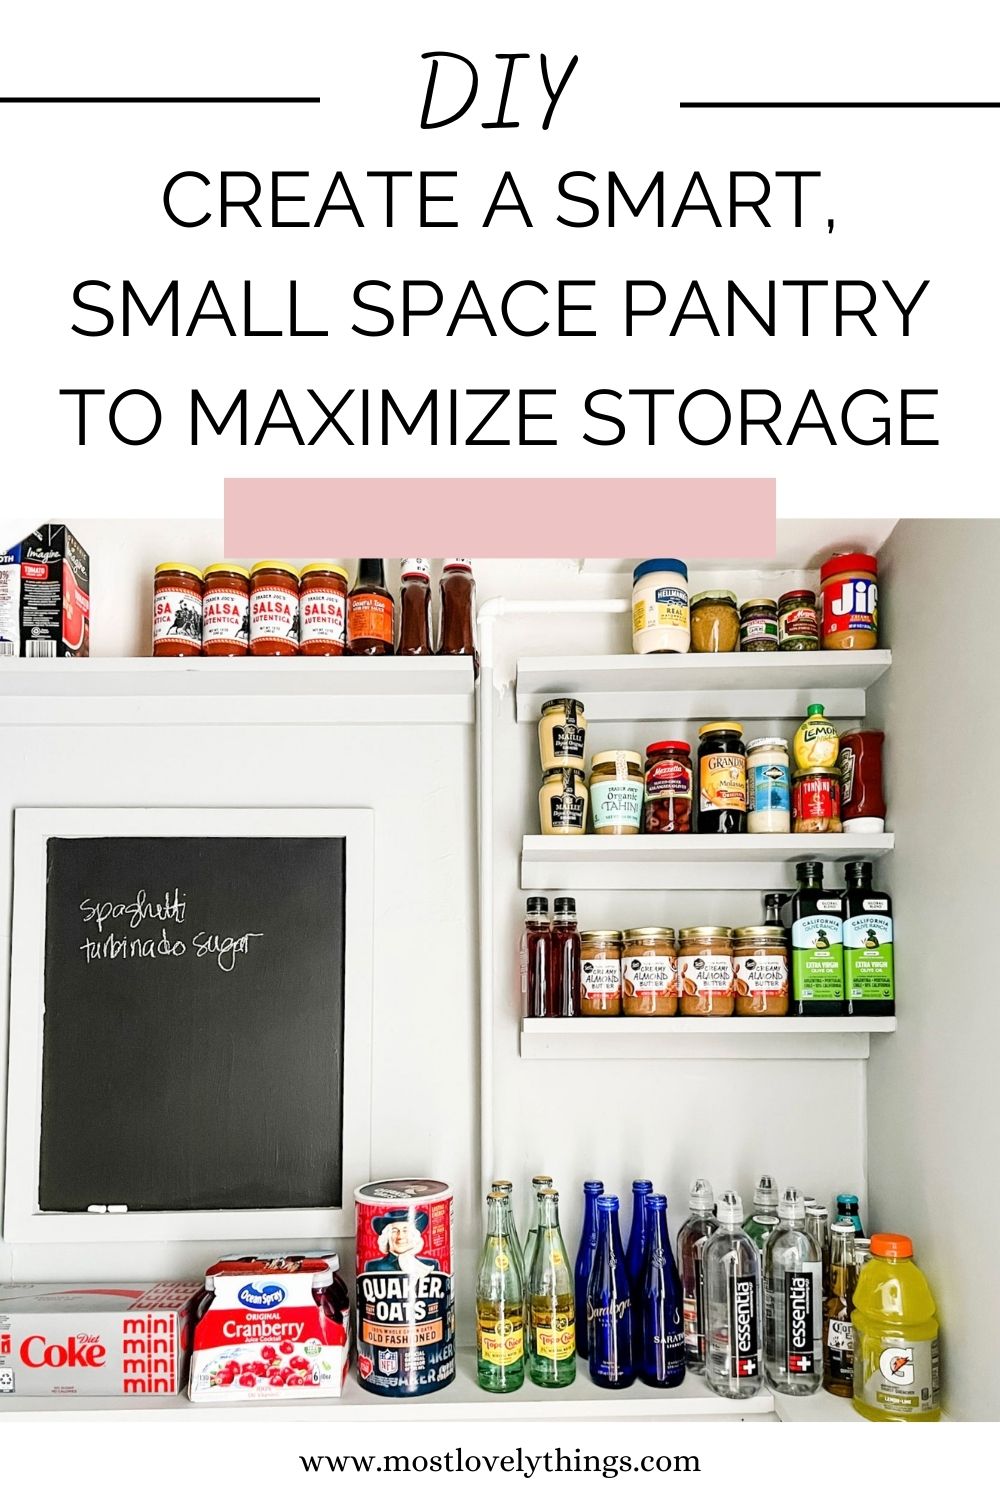 https://mostlovelythings.com/wp-content/uploads/2023/05/DIY-pantry-small-space.jpg